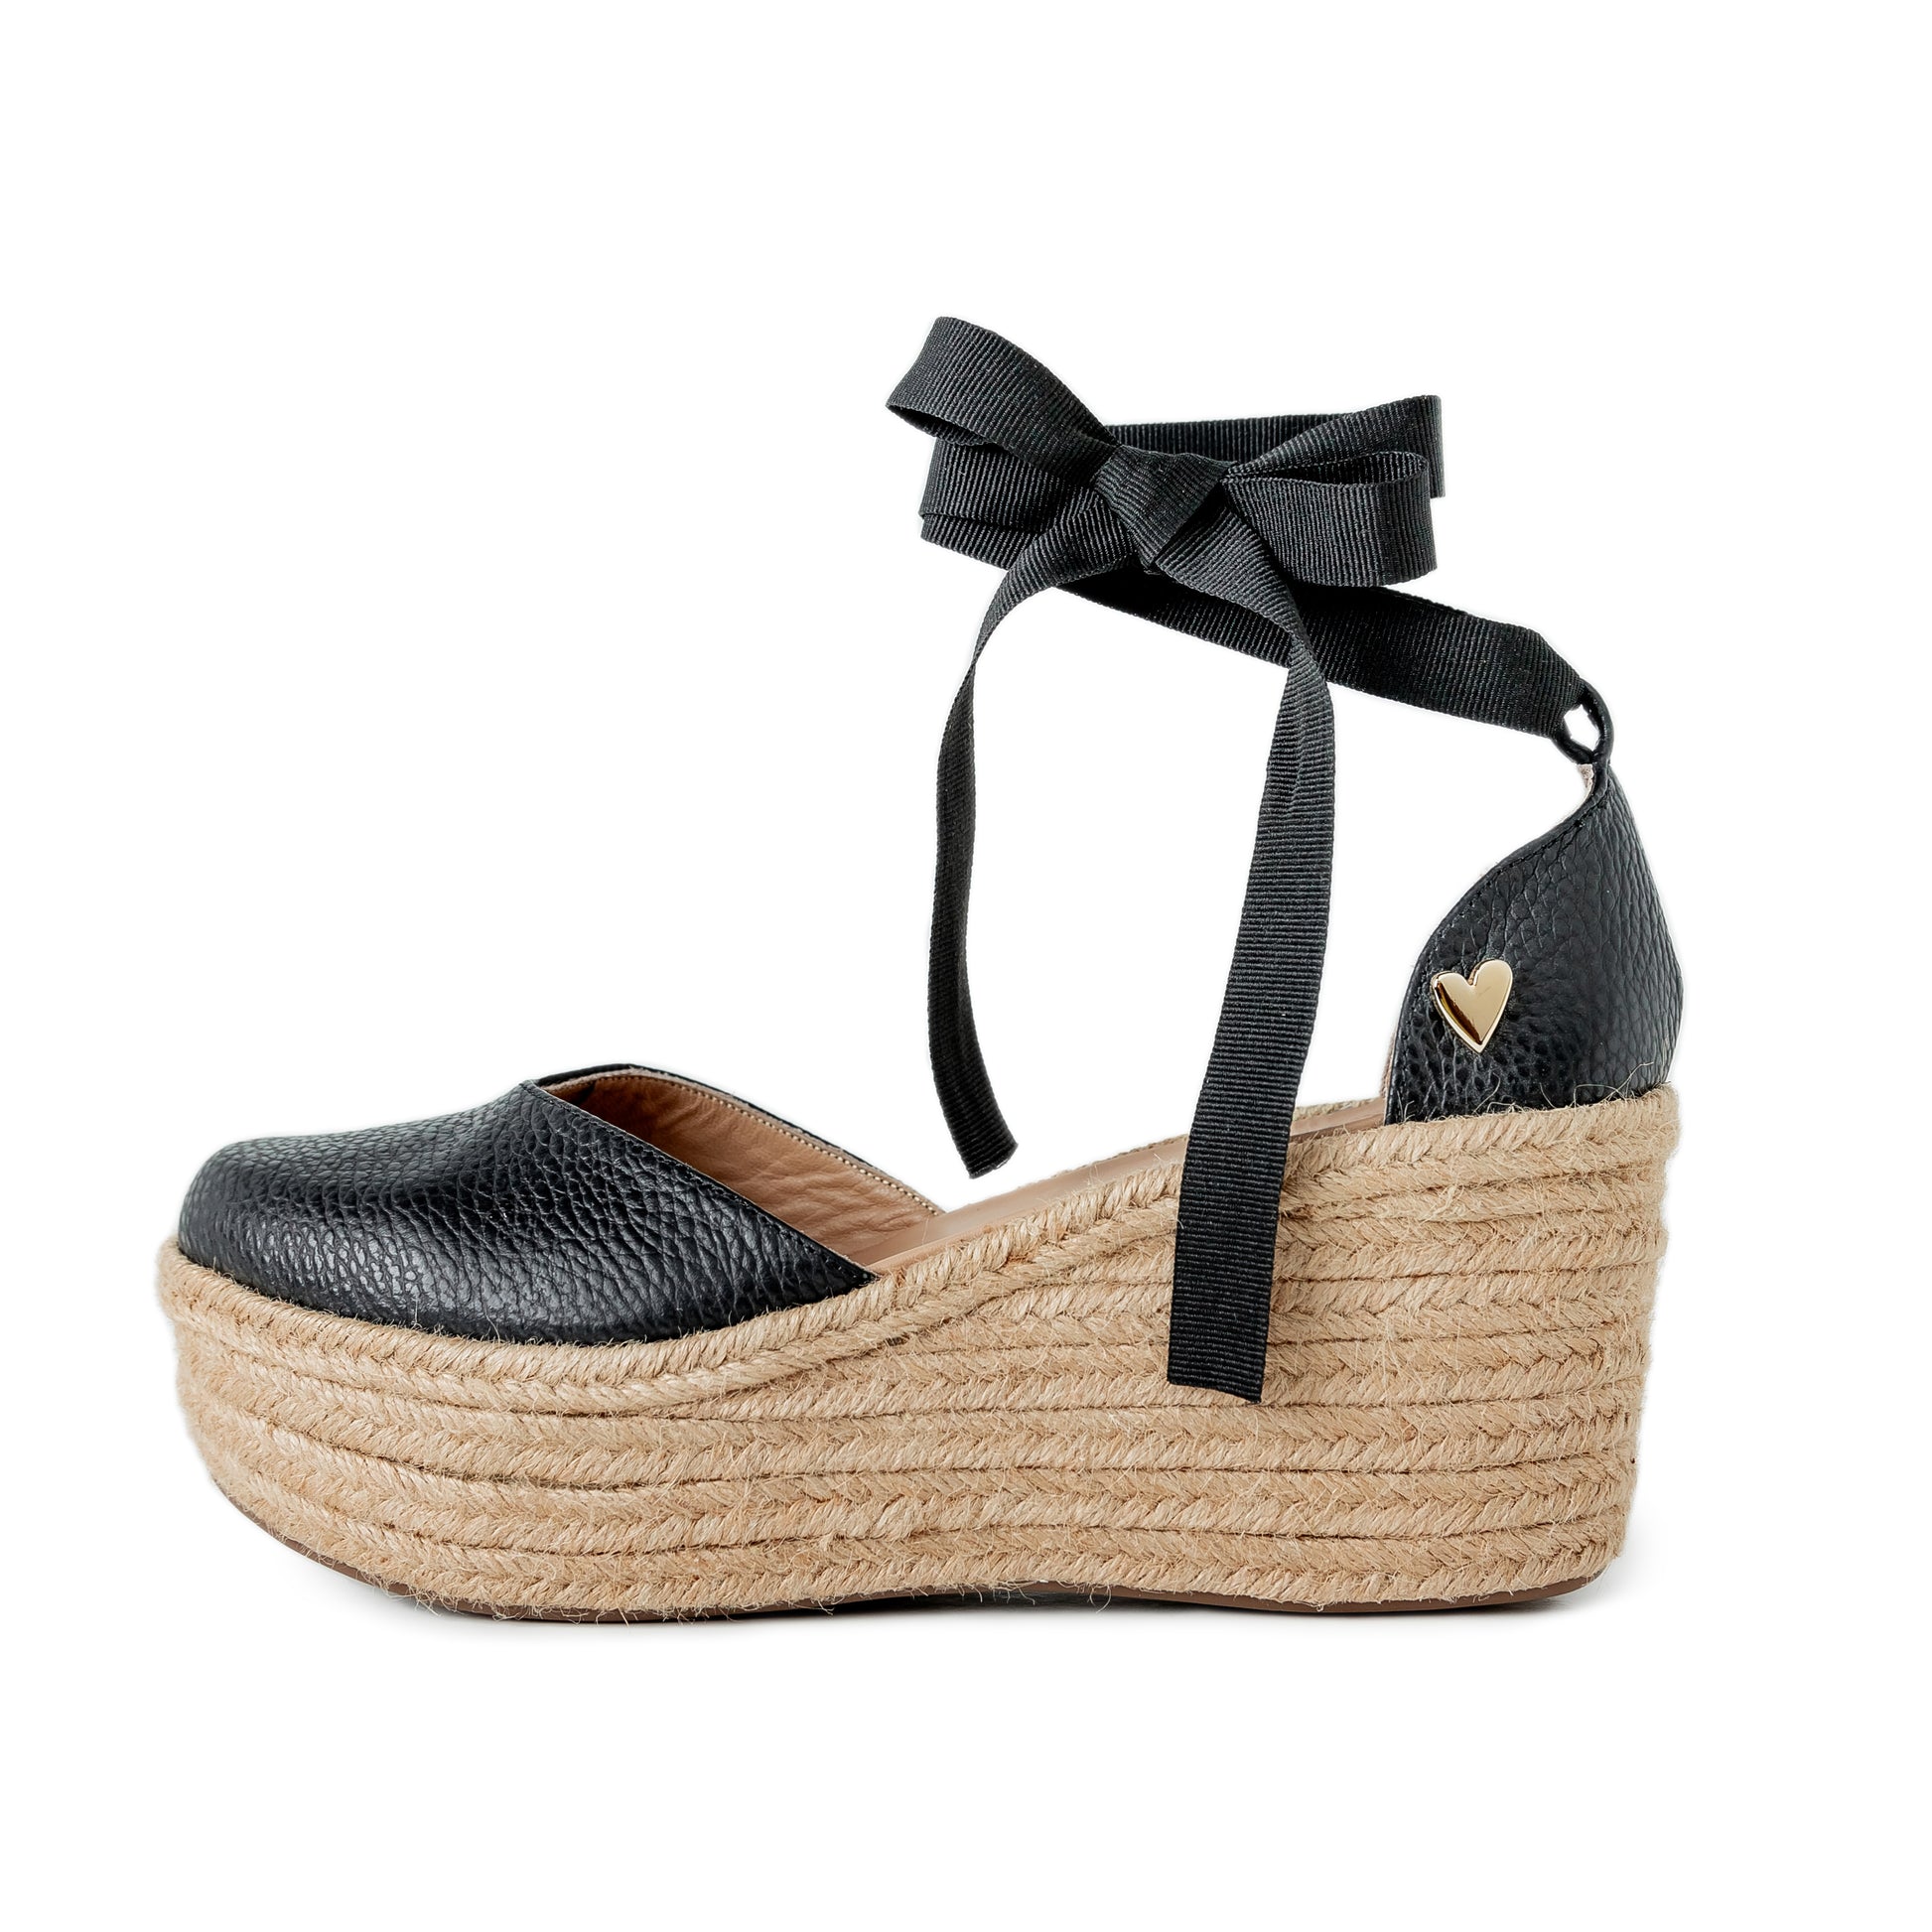 Black Low High Espadrilles by Nataly Mendez Natural jute base Genuine leather upper Genuine leather insole. 100% made in Colombia! 3 inch heel height 1.75 inch platform Comes with strap closure and beige hiladilla laces.